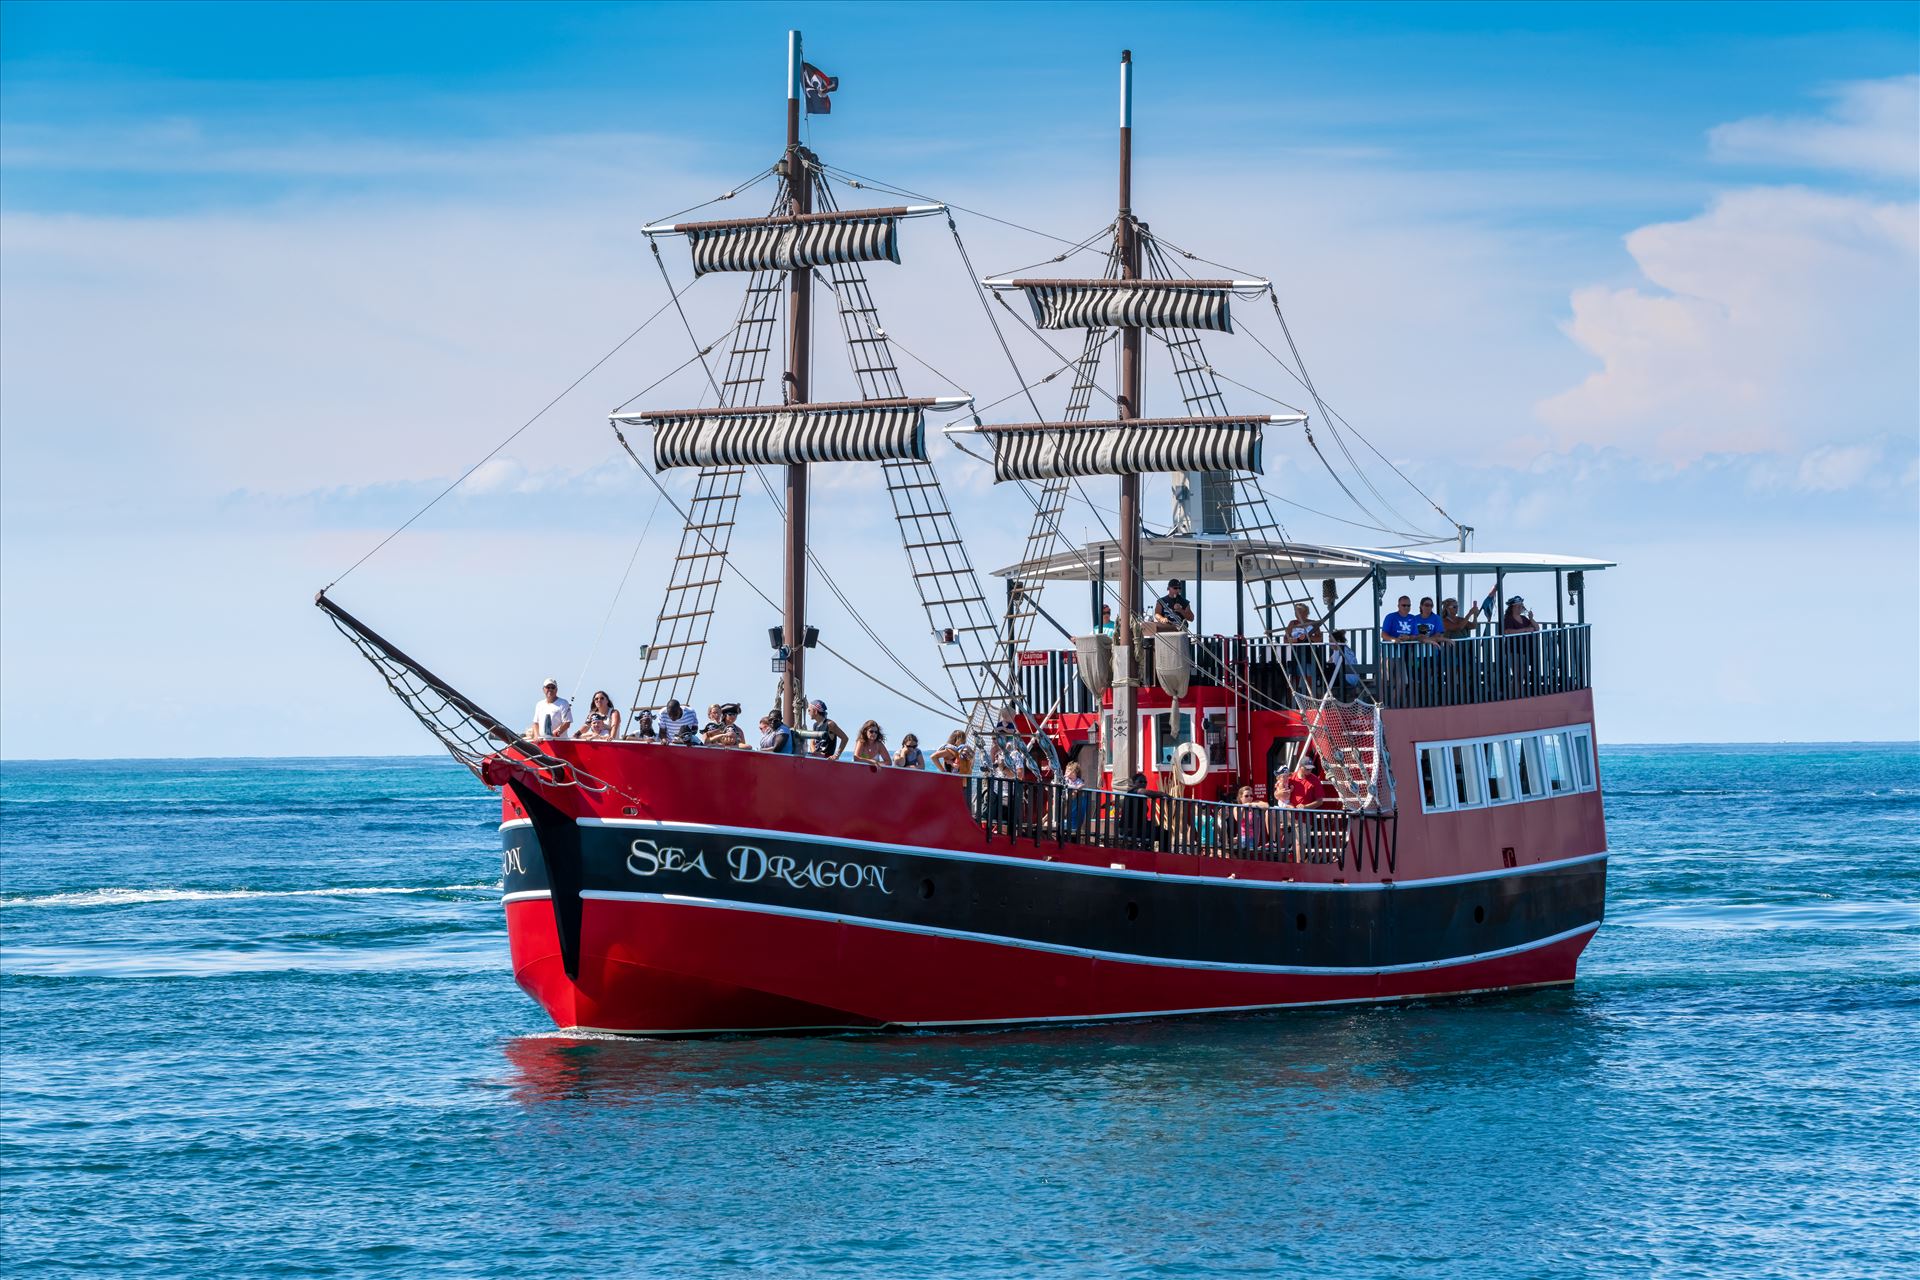 sea dragon-8500323.jpg The Sea Dragon, pirate ship entering the pass at Panama City, Florida by Terry Kelly Photography